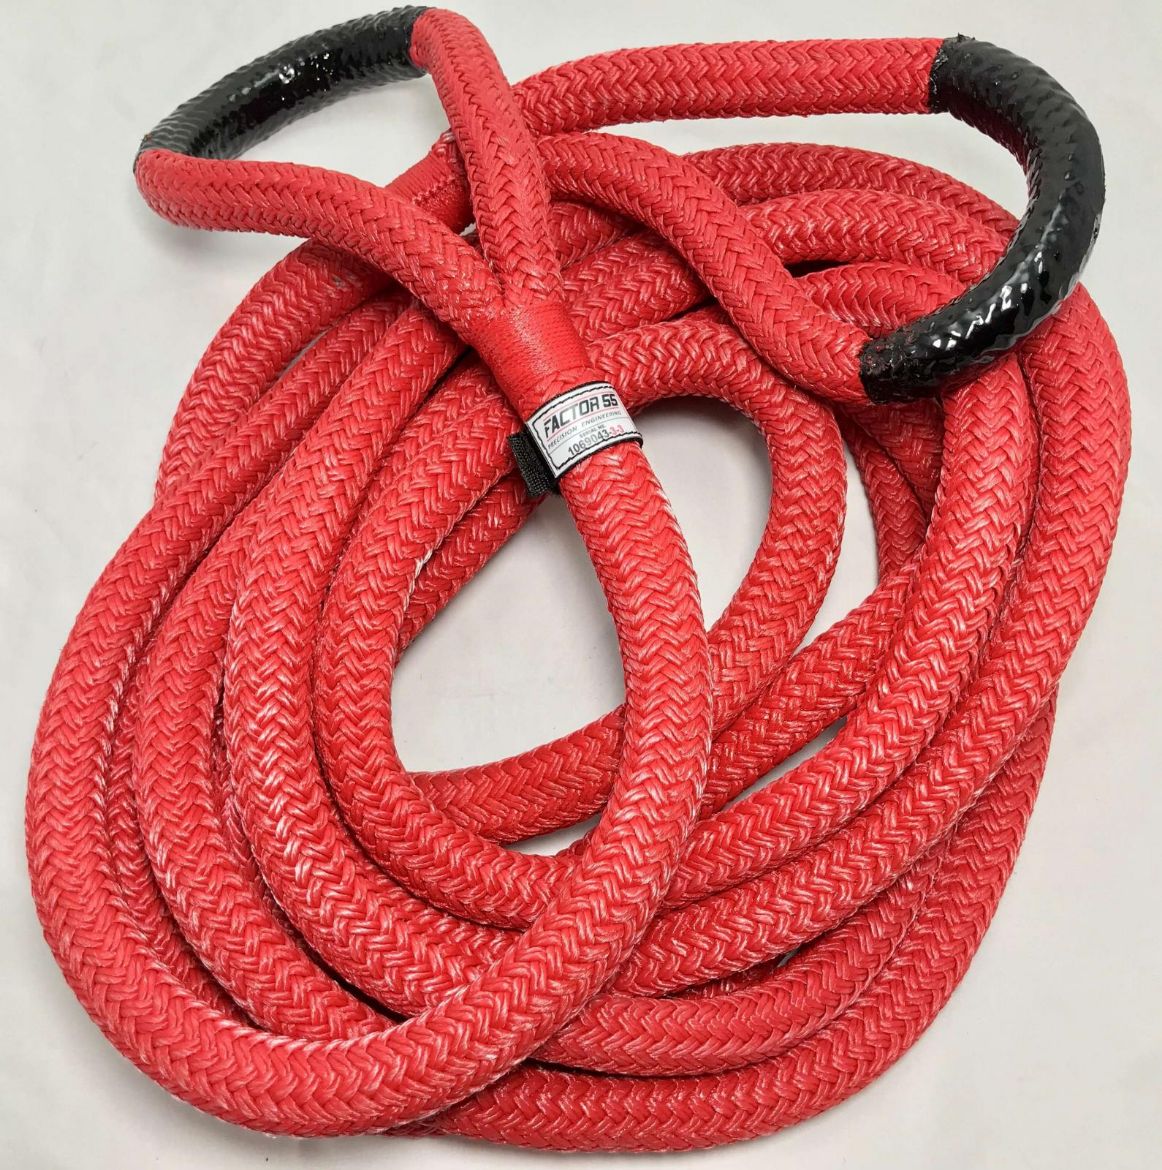 Picture of Extreme Duty Kinetic Energy Rope 7/8 Inch x 30 Foot Factor 55